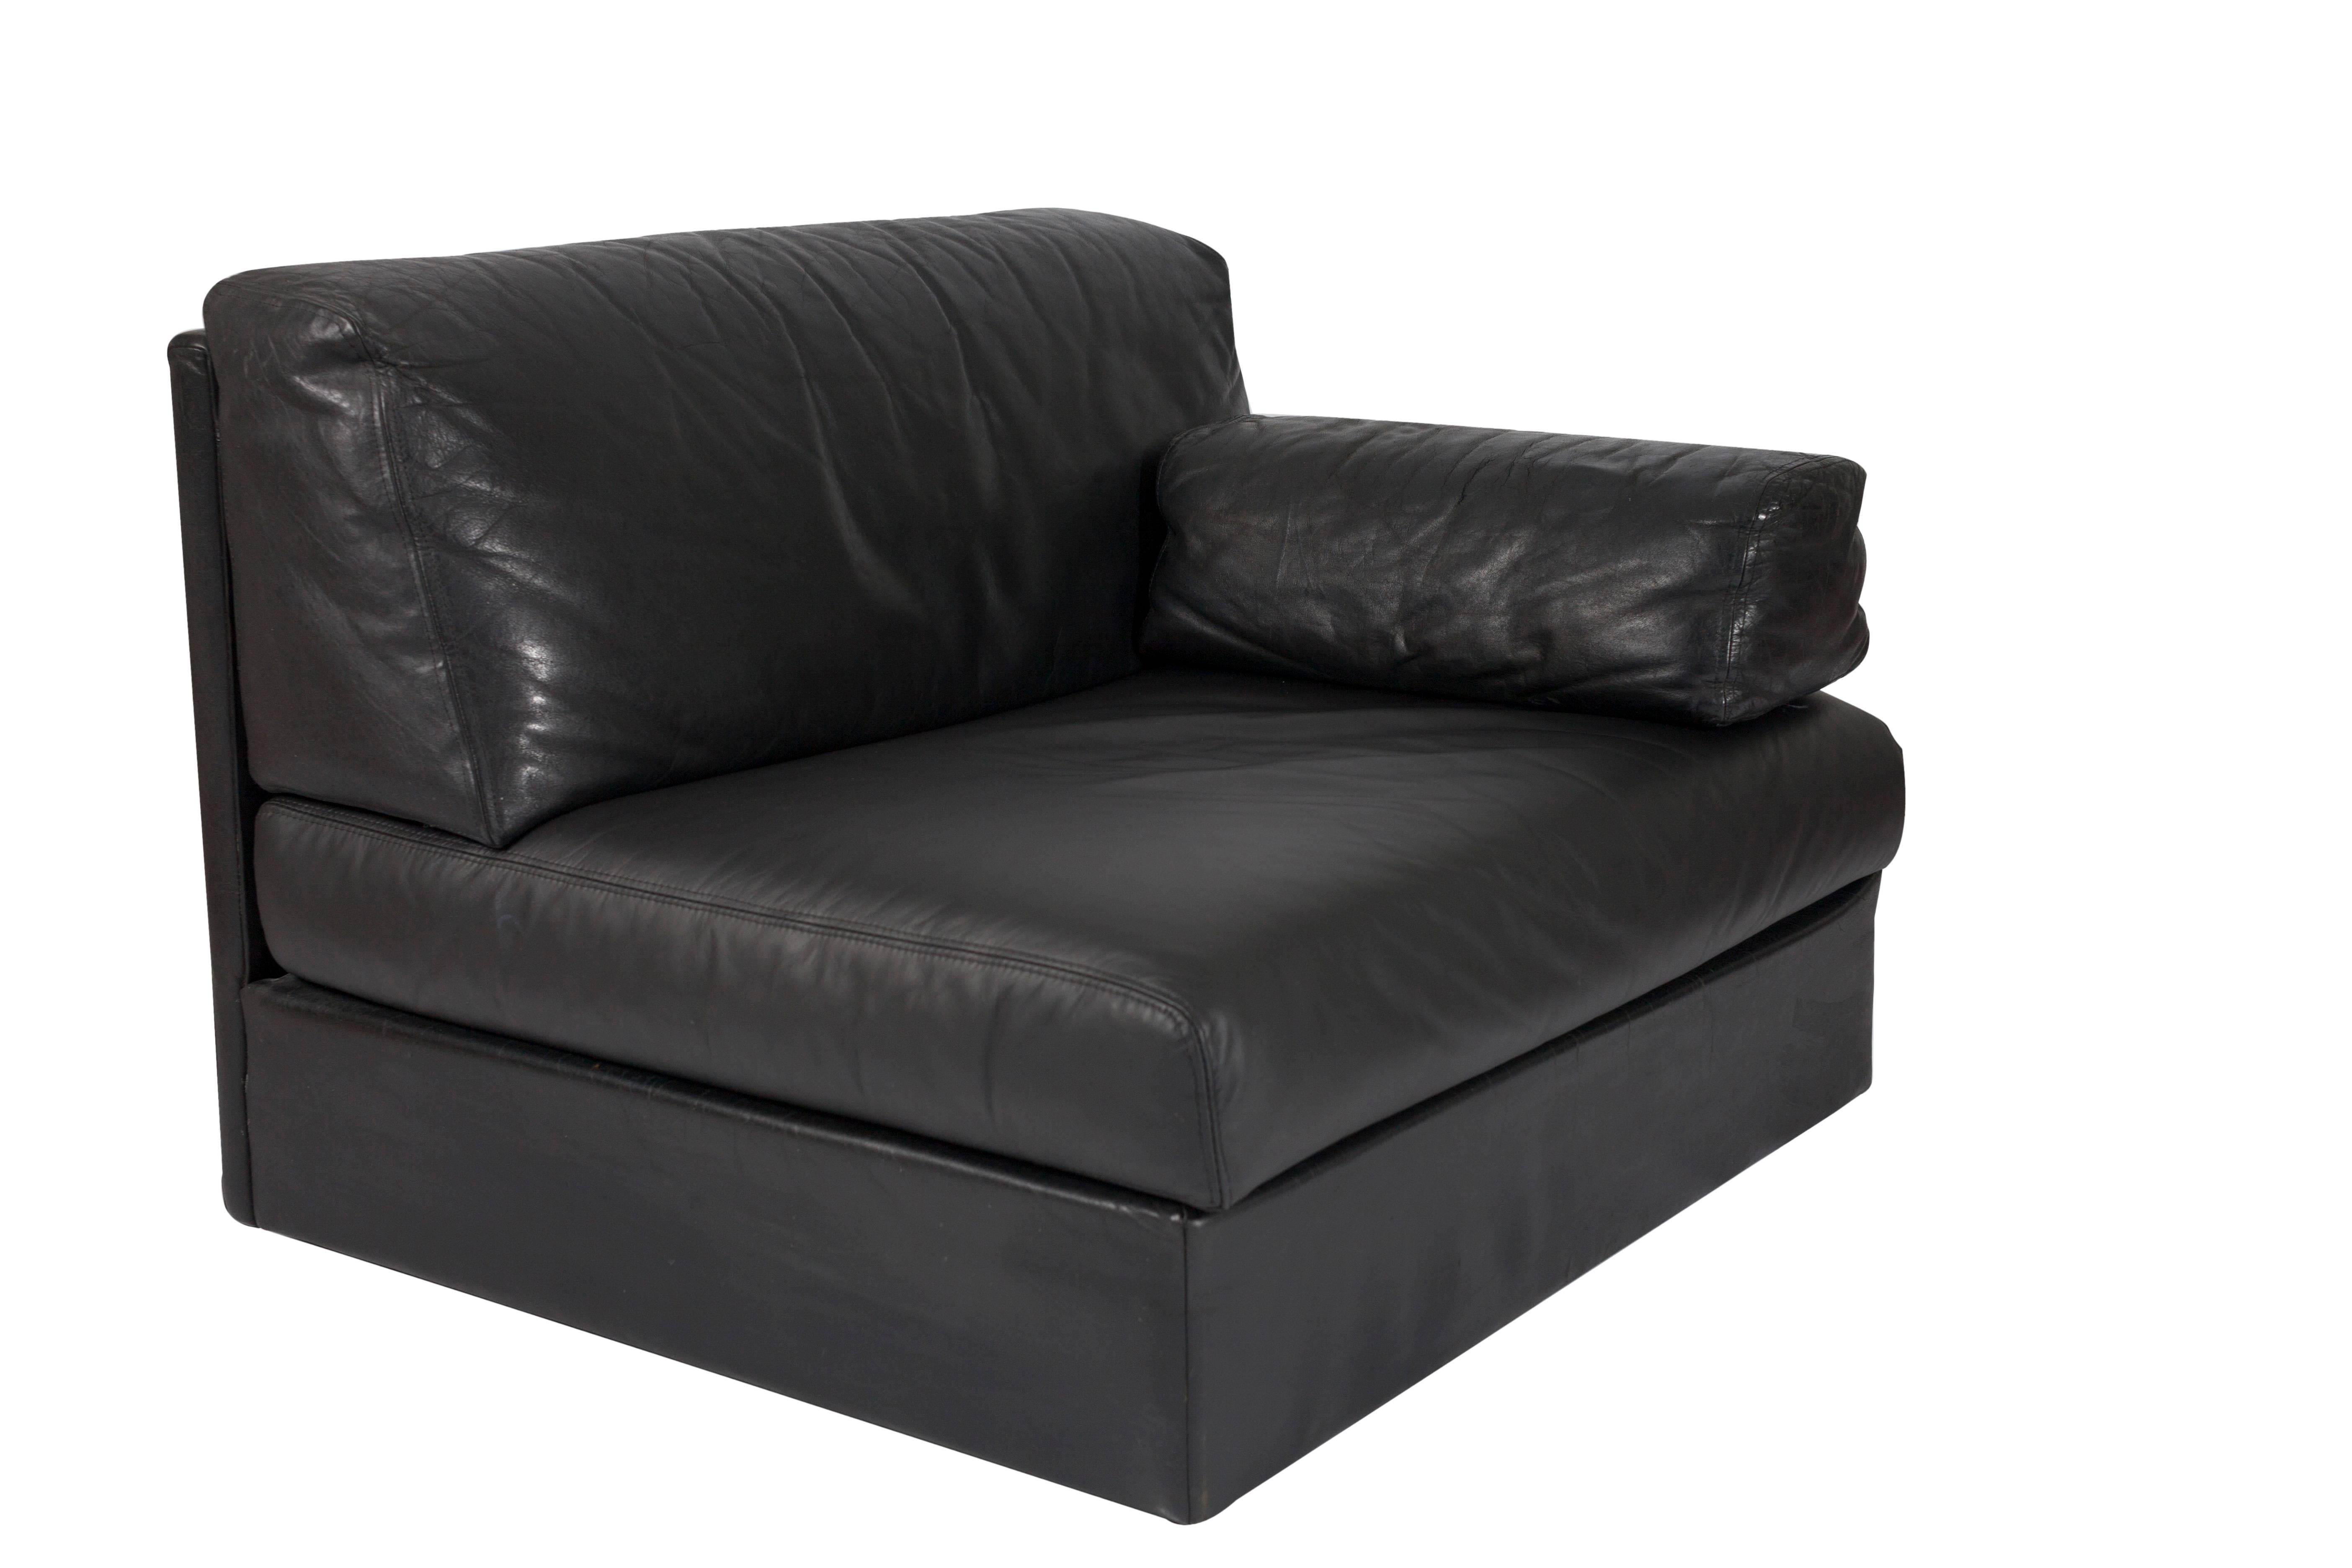 Late 20th Century Black Leather Sectional Sofa in the Style of De Sede